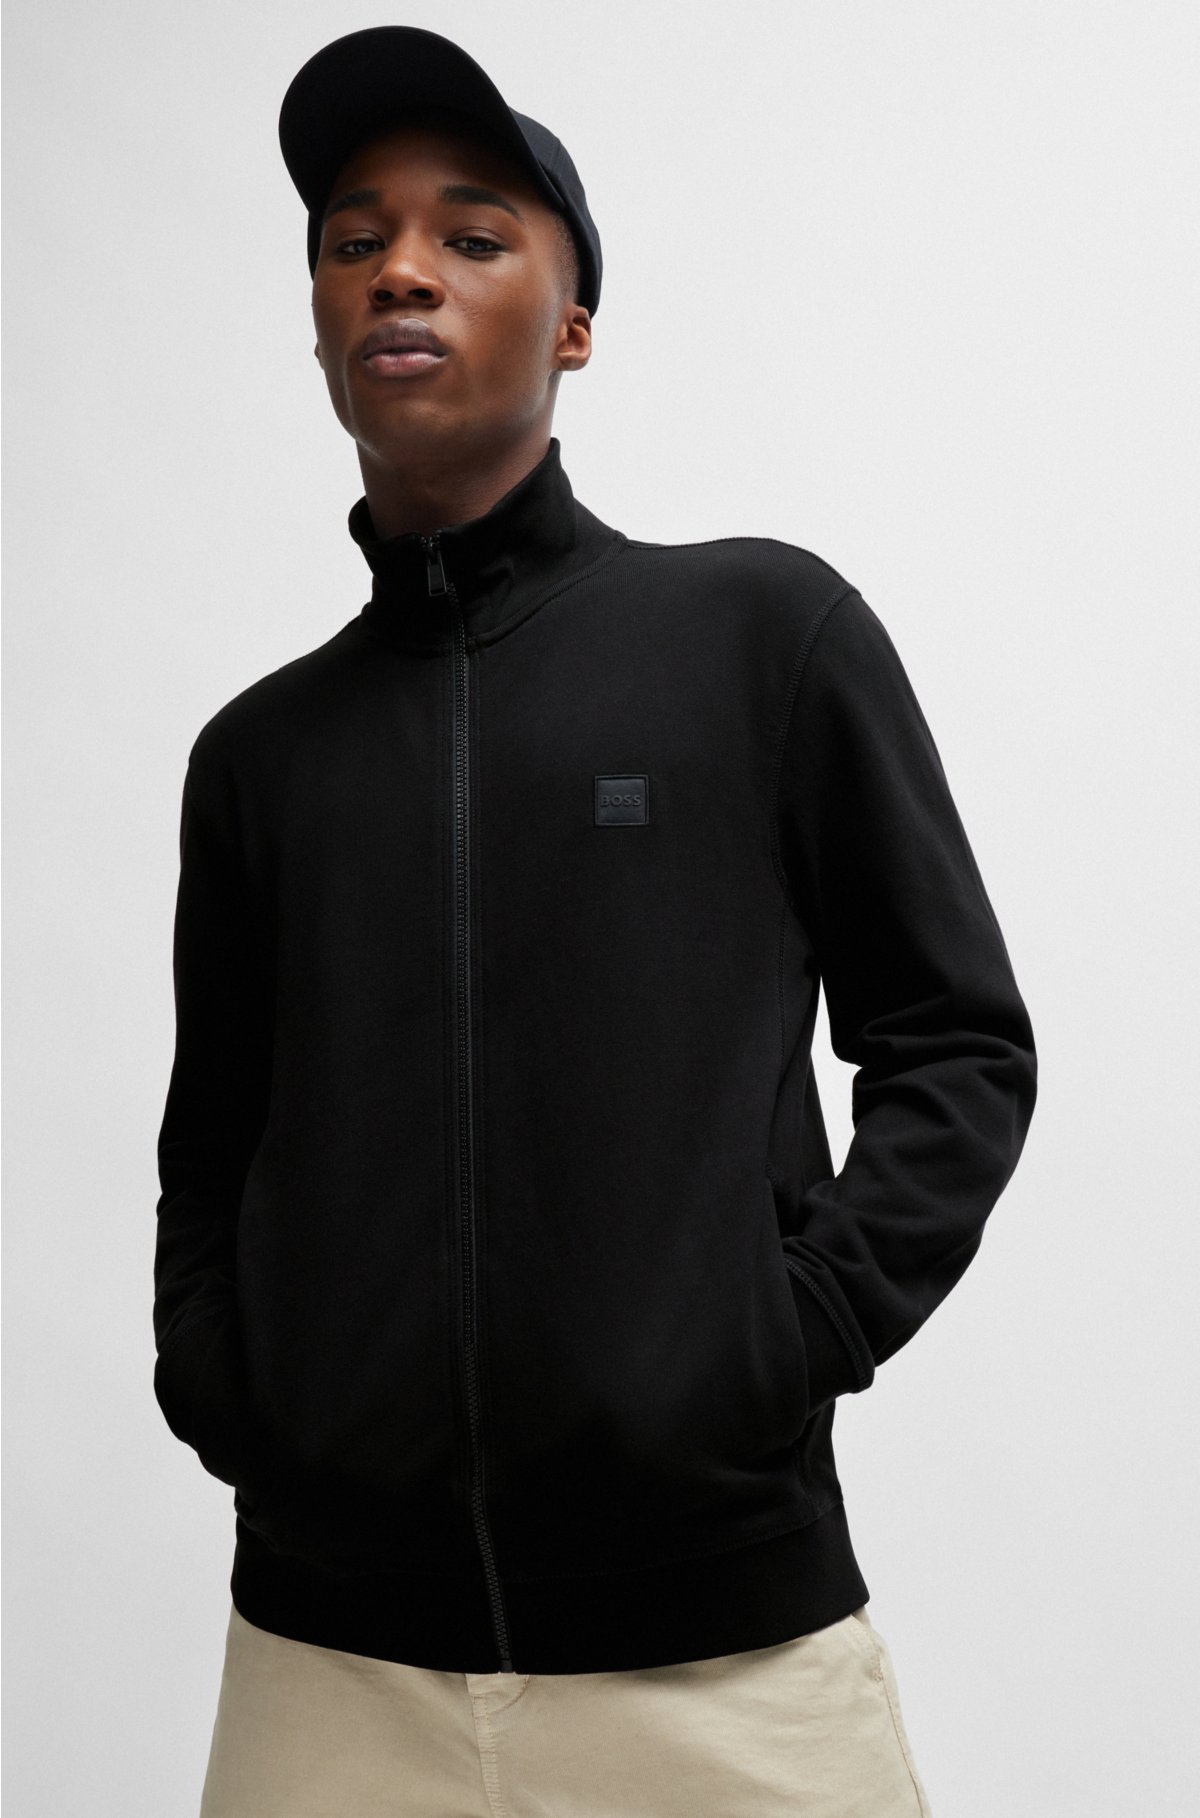 Cotton-terry zip-up jacket with logo patch, Black